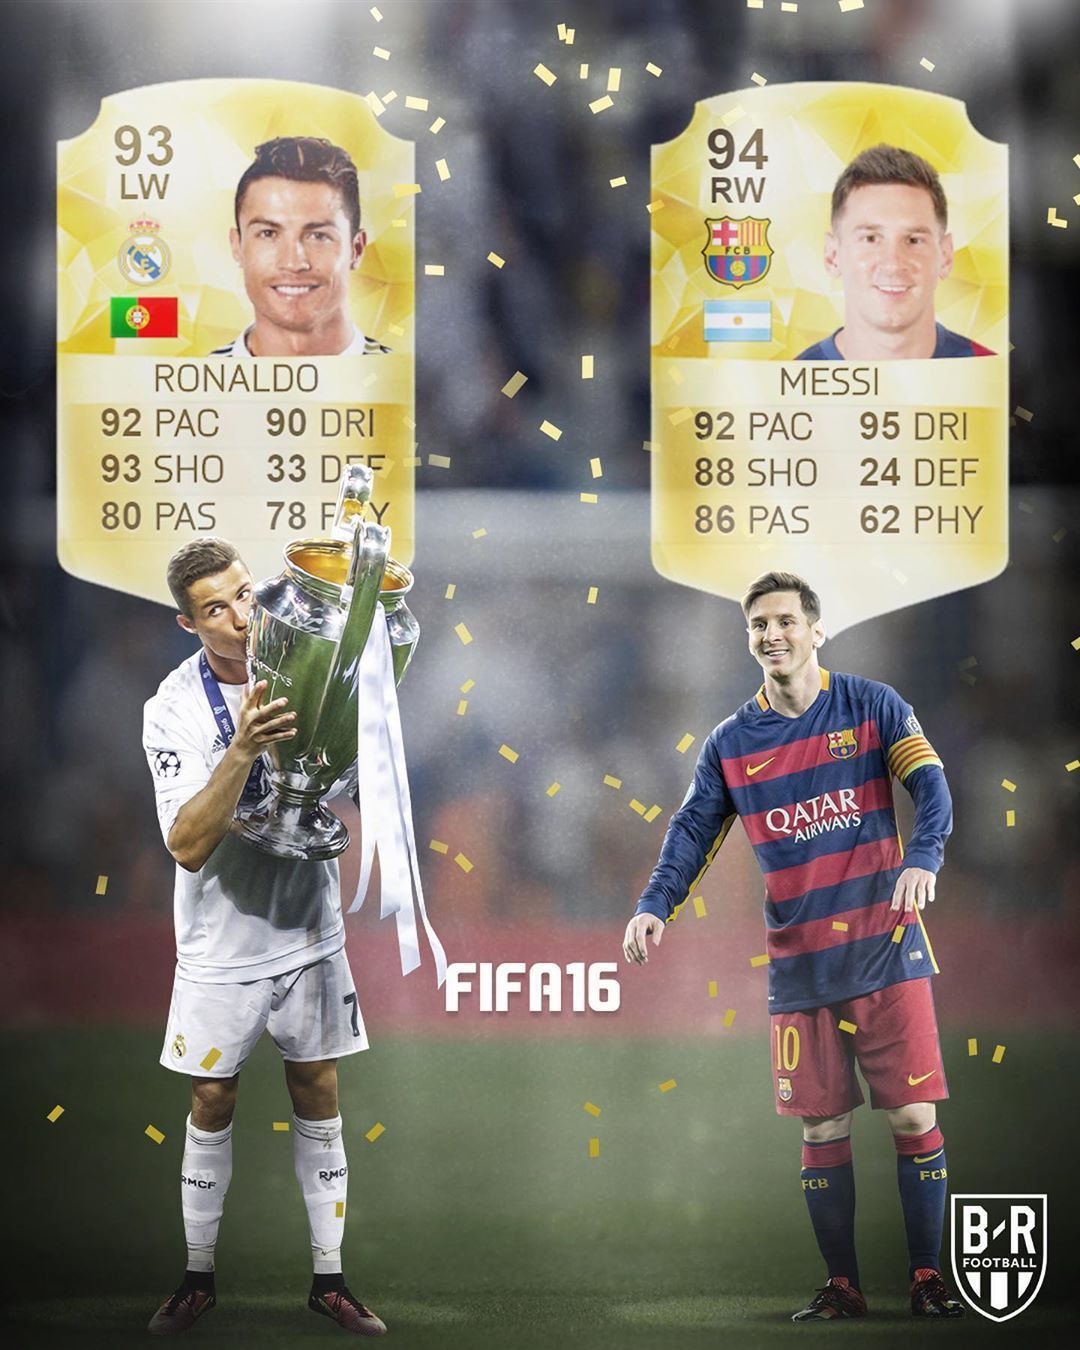 Messi and Ronaldo over the last 10 years on FIFA. GOATs